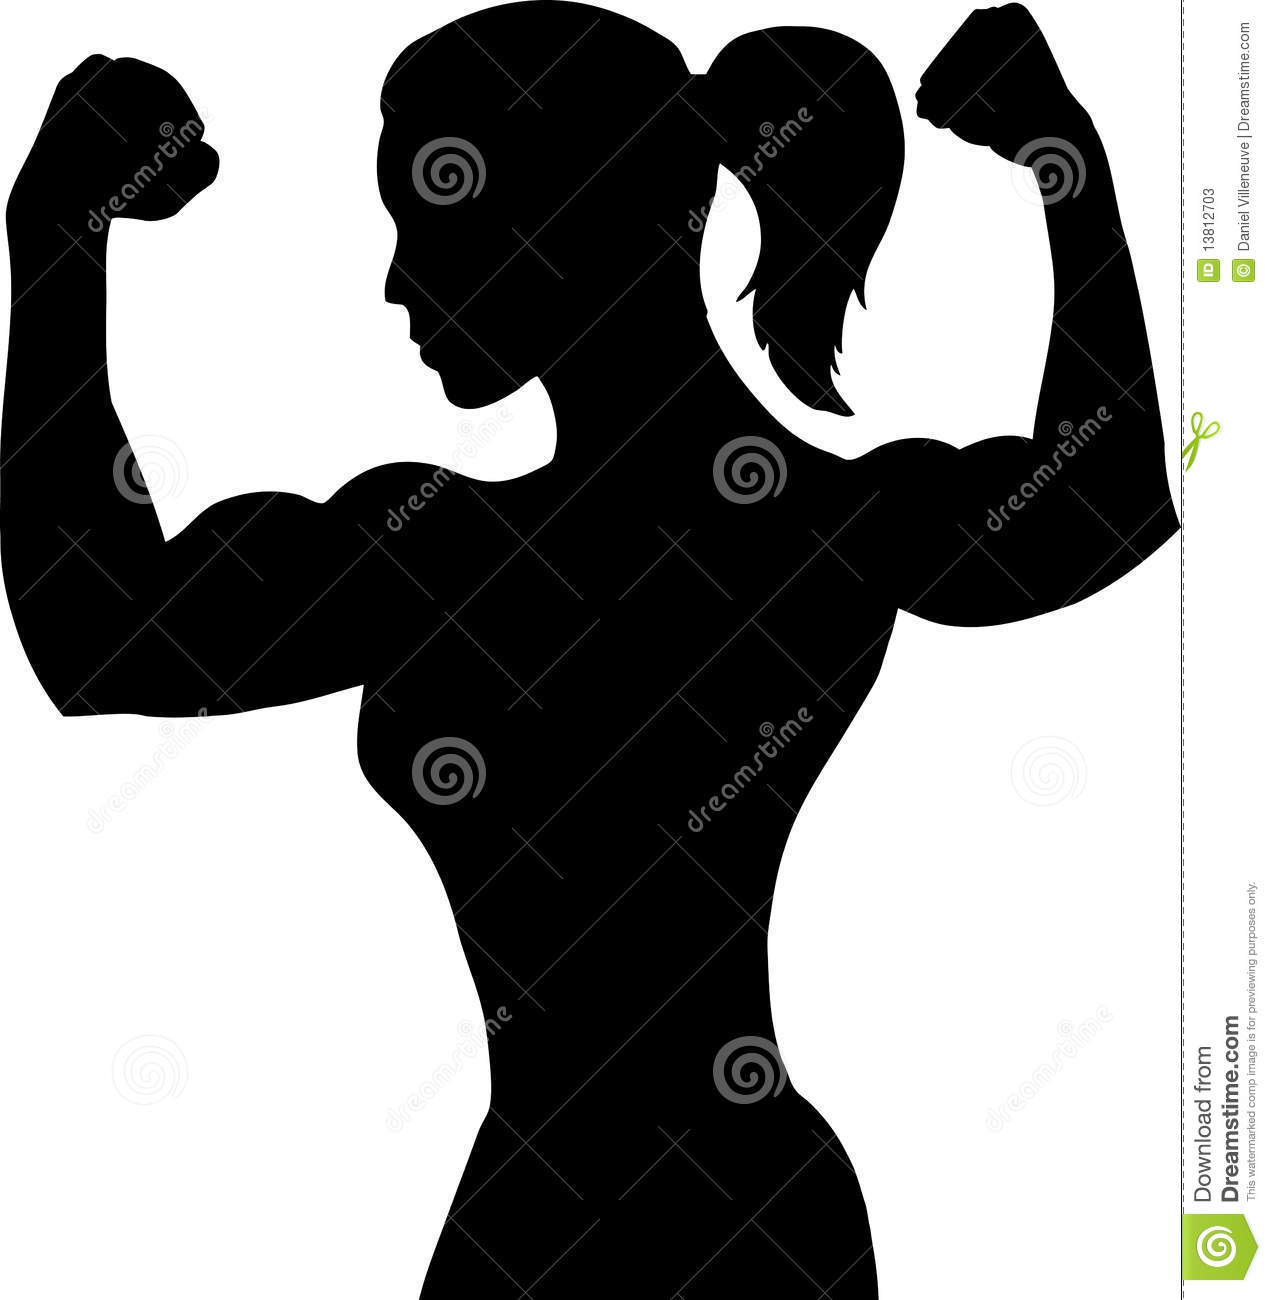 More Similar Stock Images Of   Outline Of A Female Bodybuilder